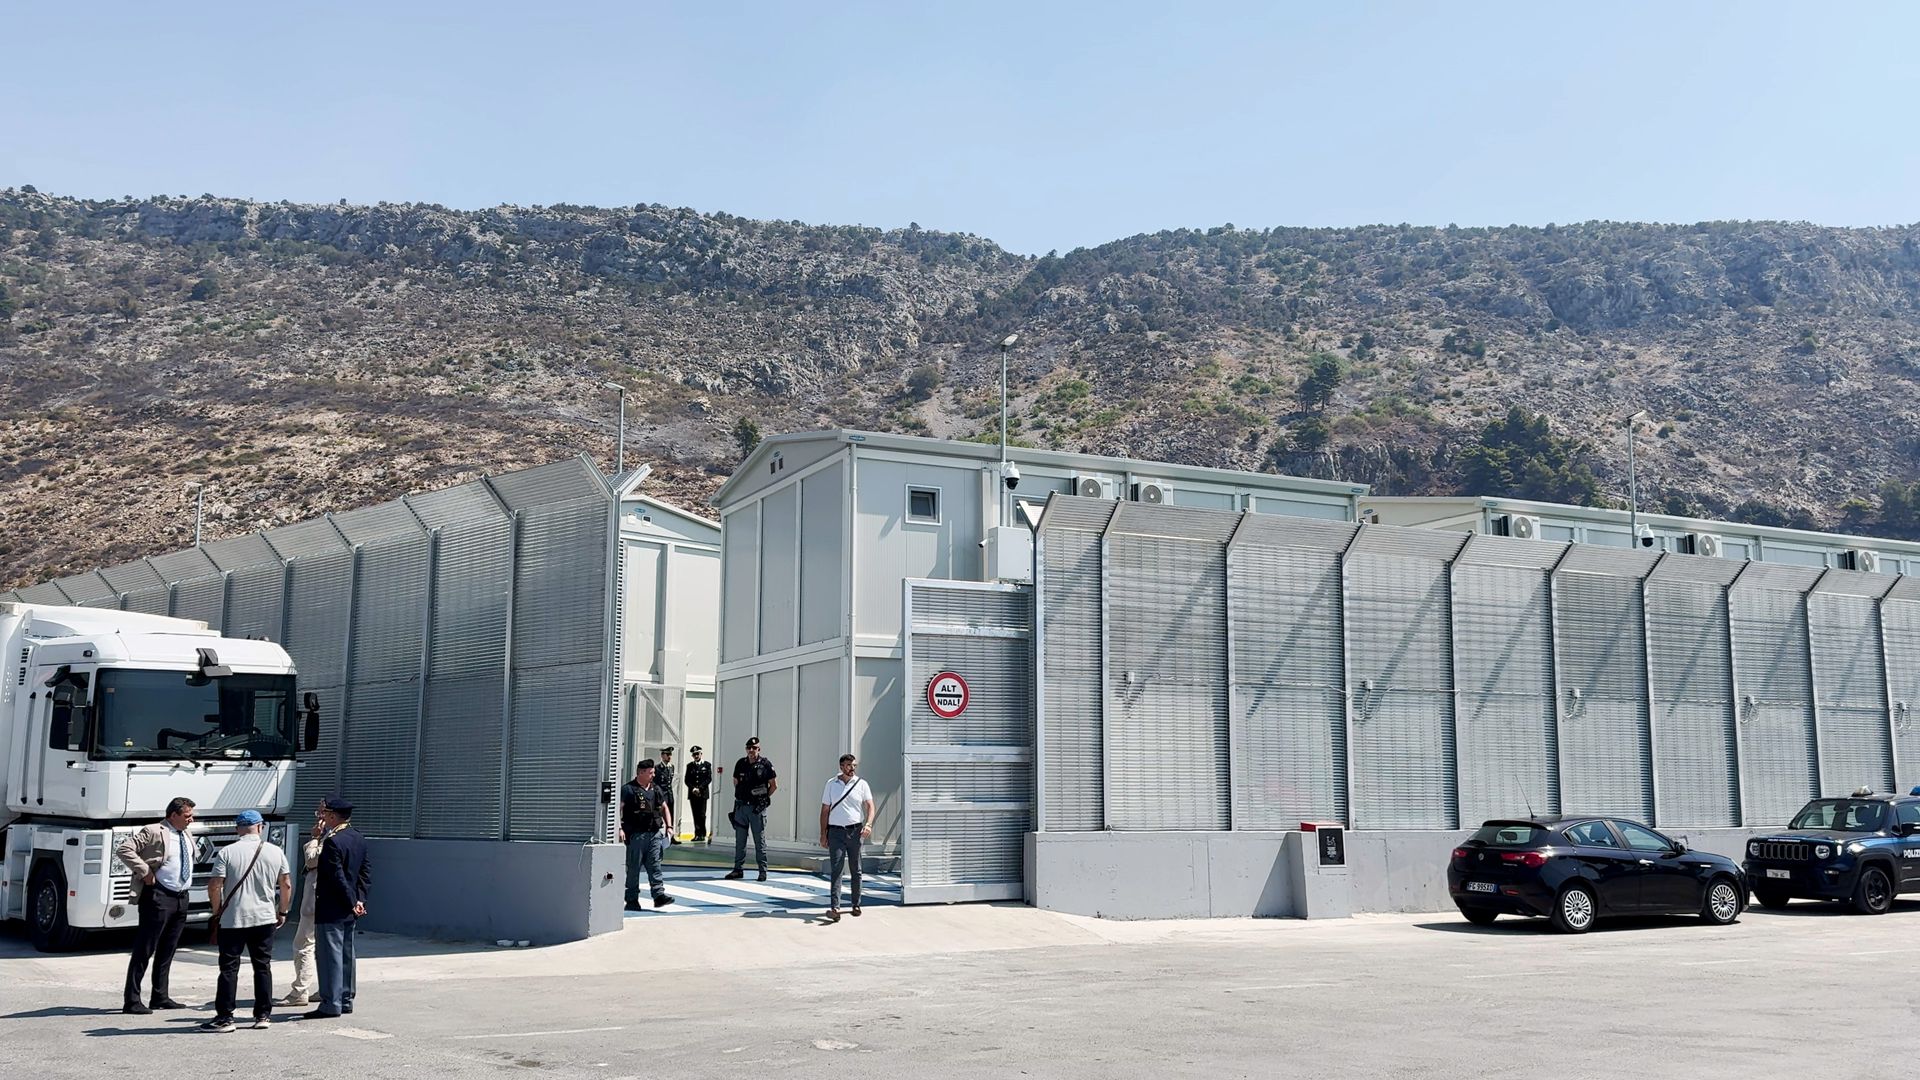 Italy's 'Guantanamo': Inside the centres for migrants set to open in Albania